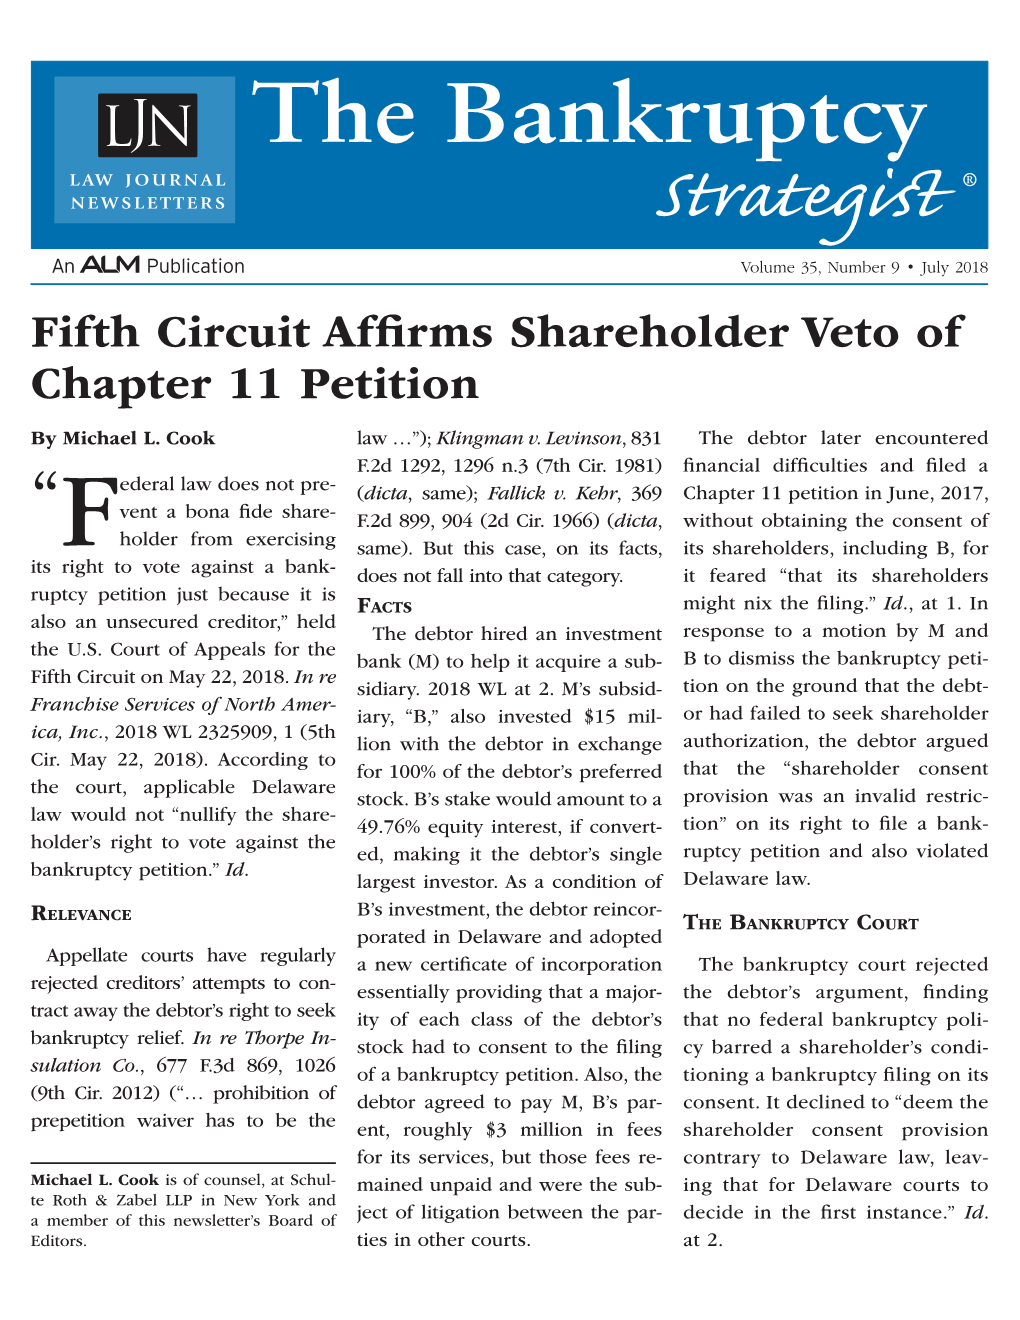 The Bankruptcy Strategist ® Volume 35, Number 9 • July 2018 Fifth Circuit Affirms Shareholder Veto of Chapter 11 Petition by Michael L